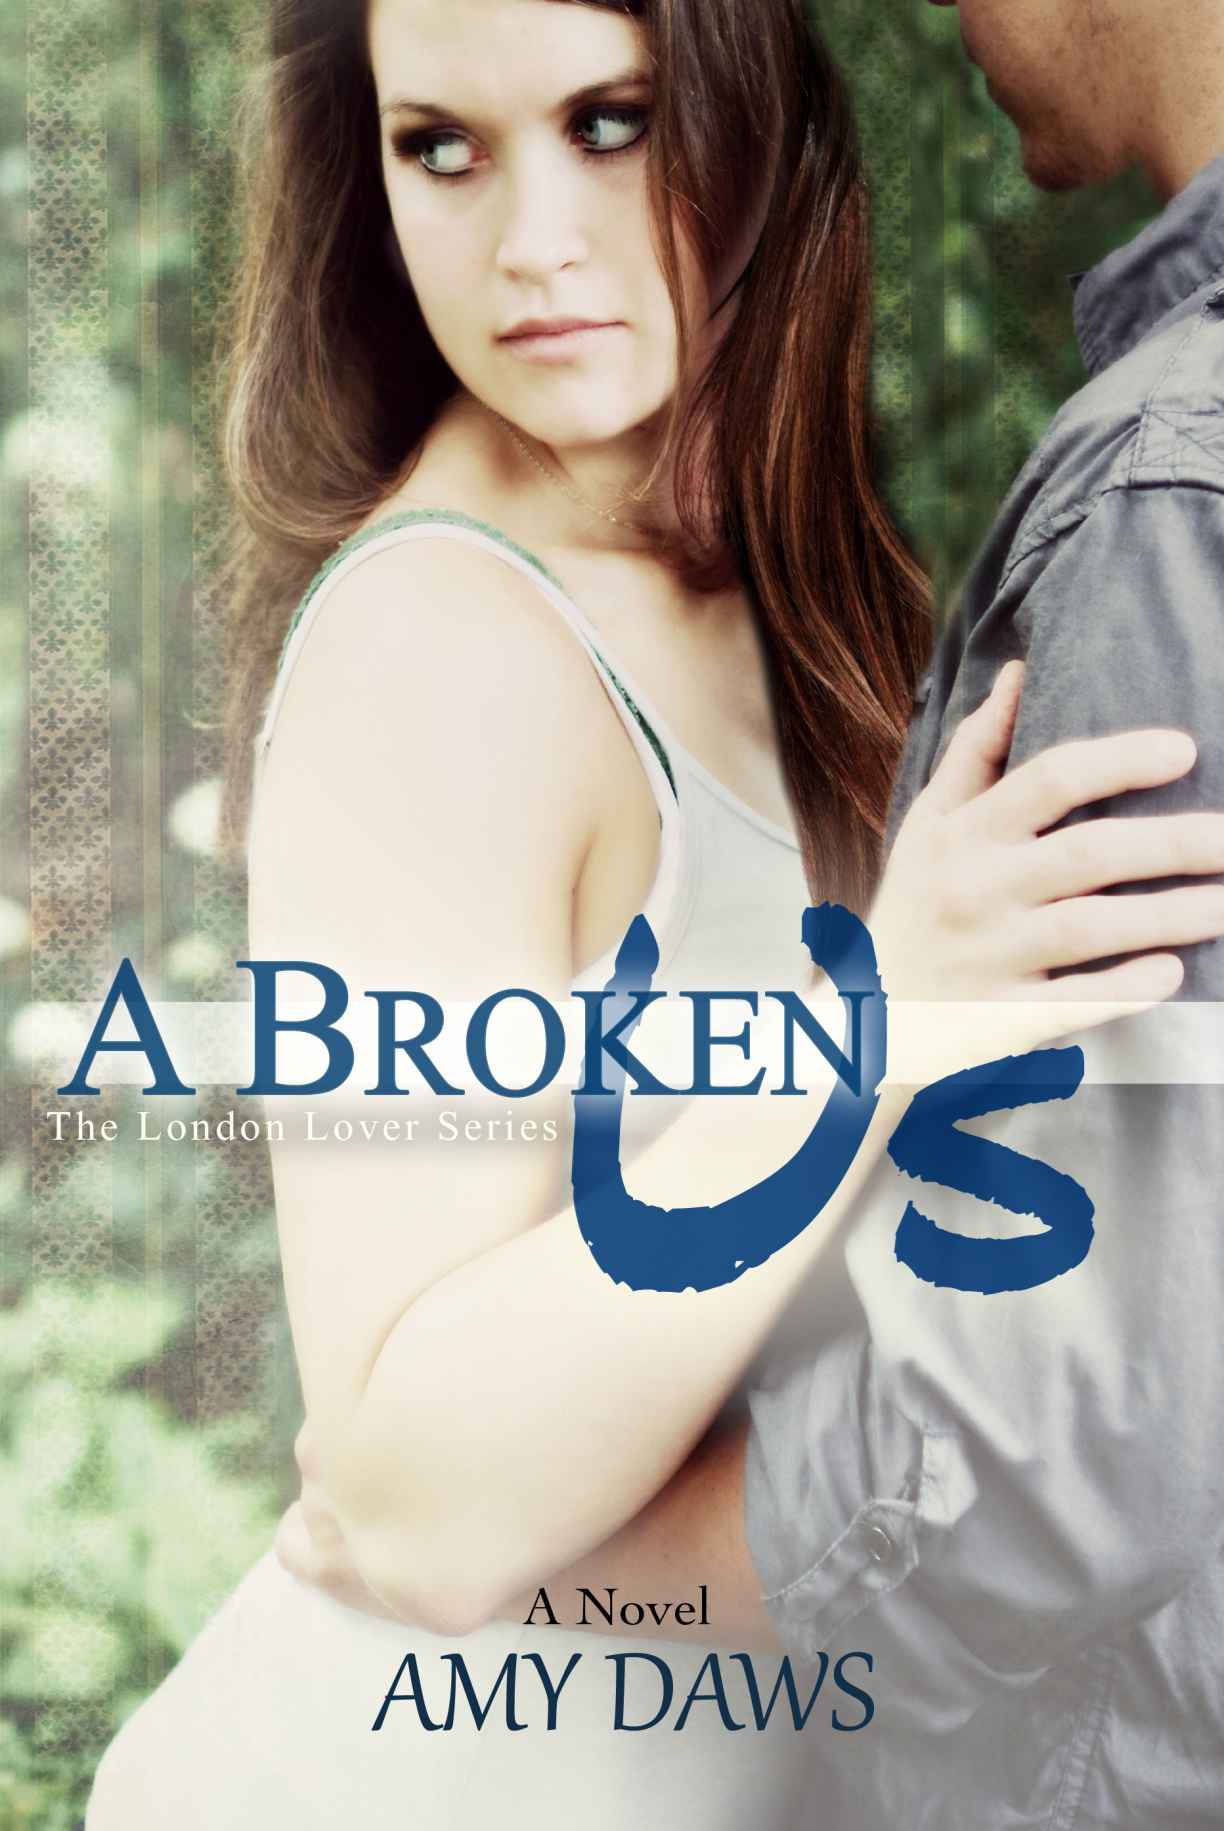 A Broken Us (London Lover Series Book 1) by Amy Daws